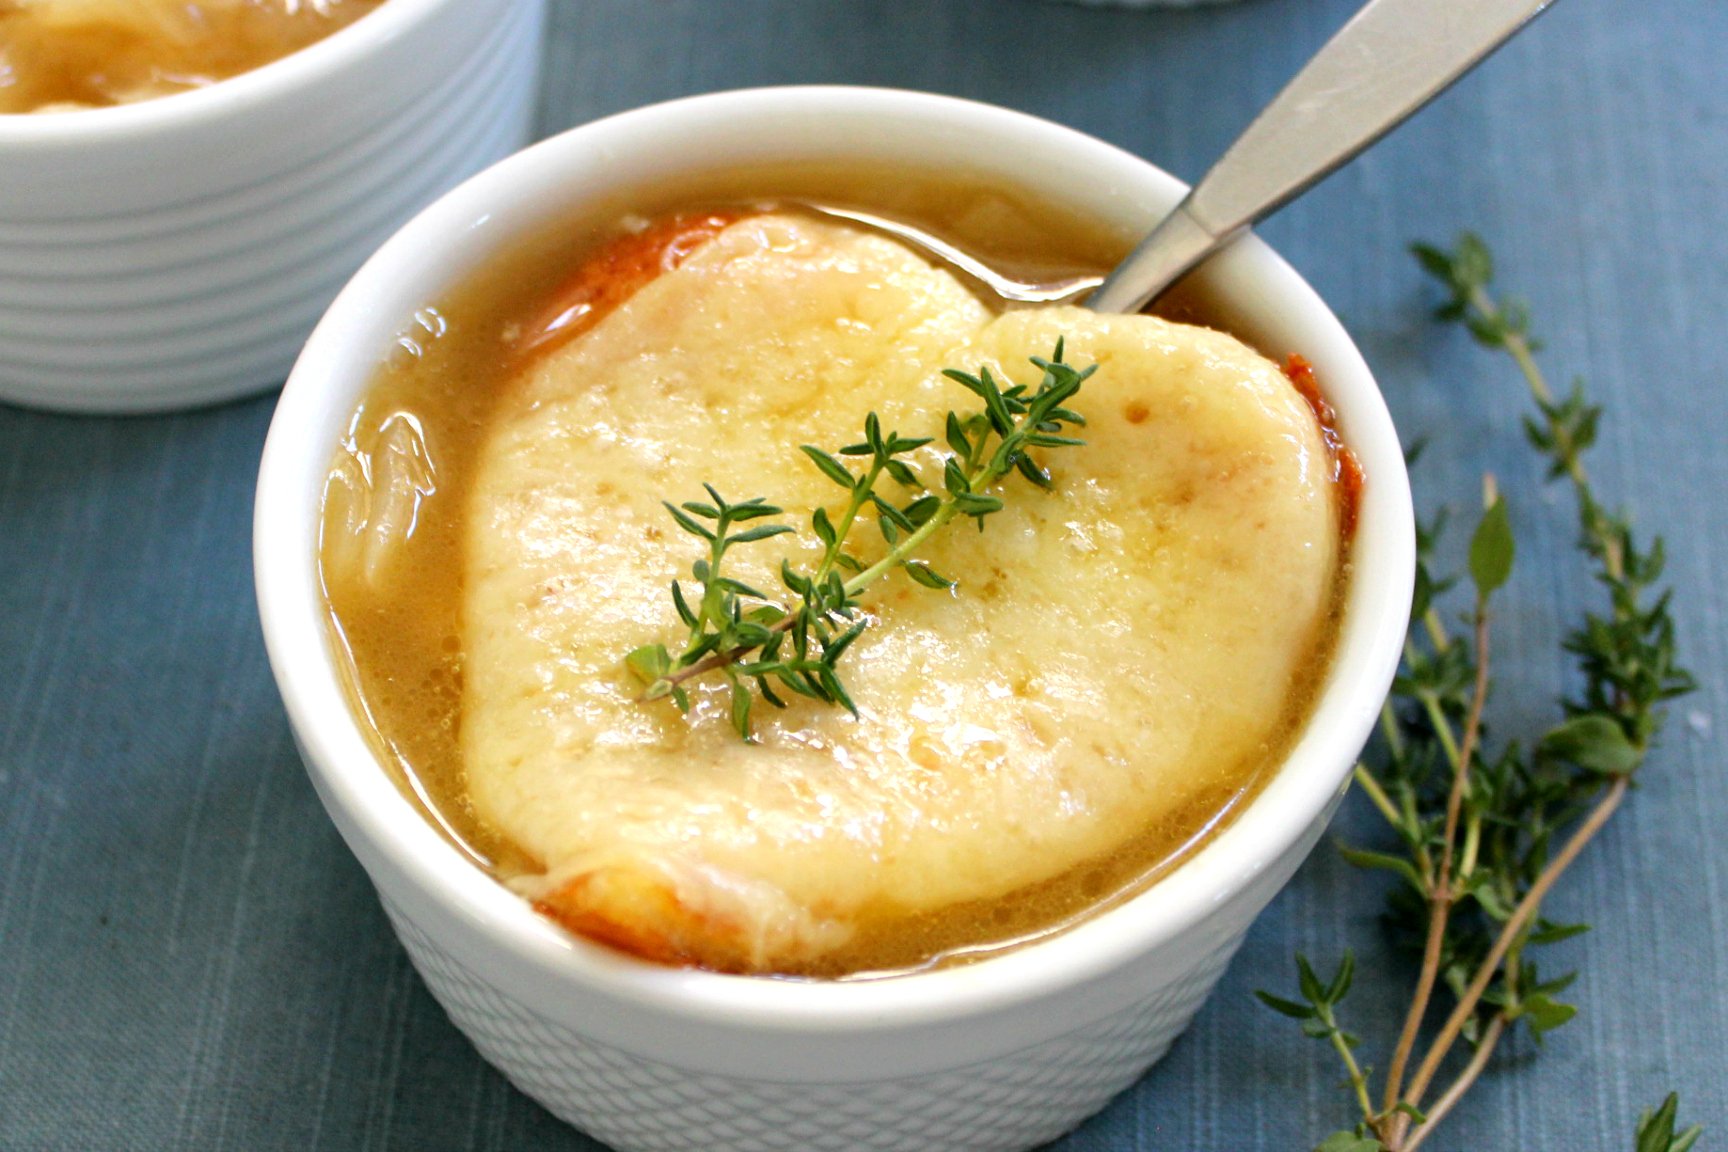 https://healthhomeandhappiness.com/wp-content/uploads/2018/09/Keto-Fathead-French-Onion-Soup.jpg